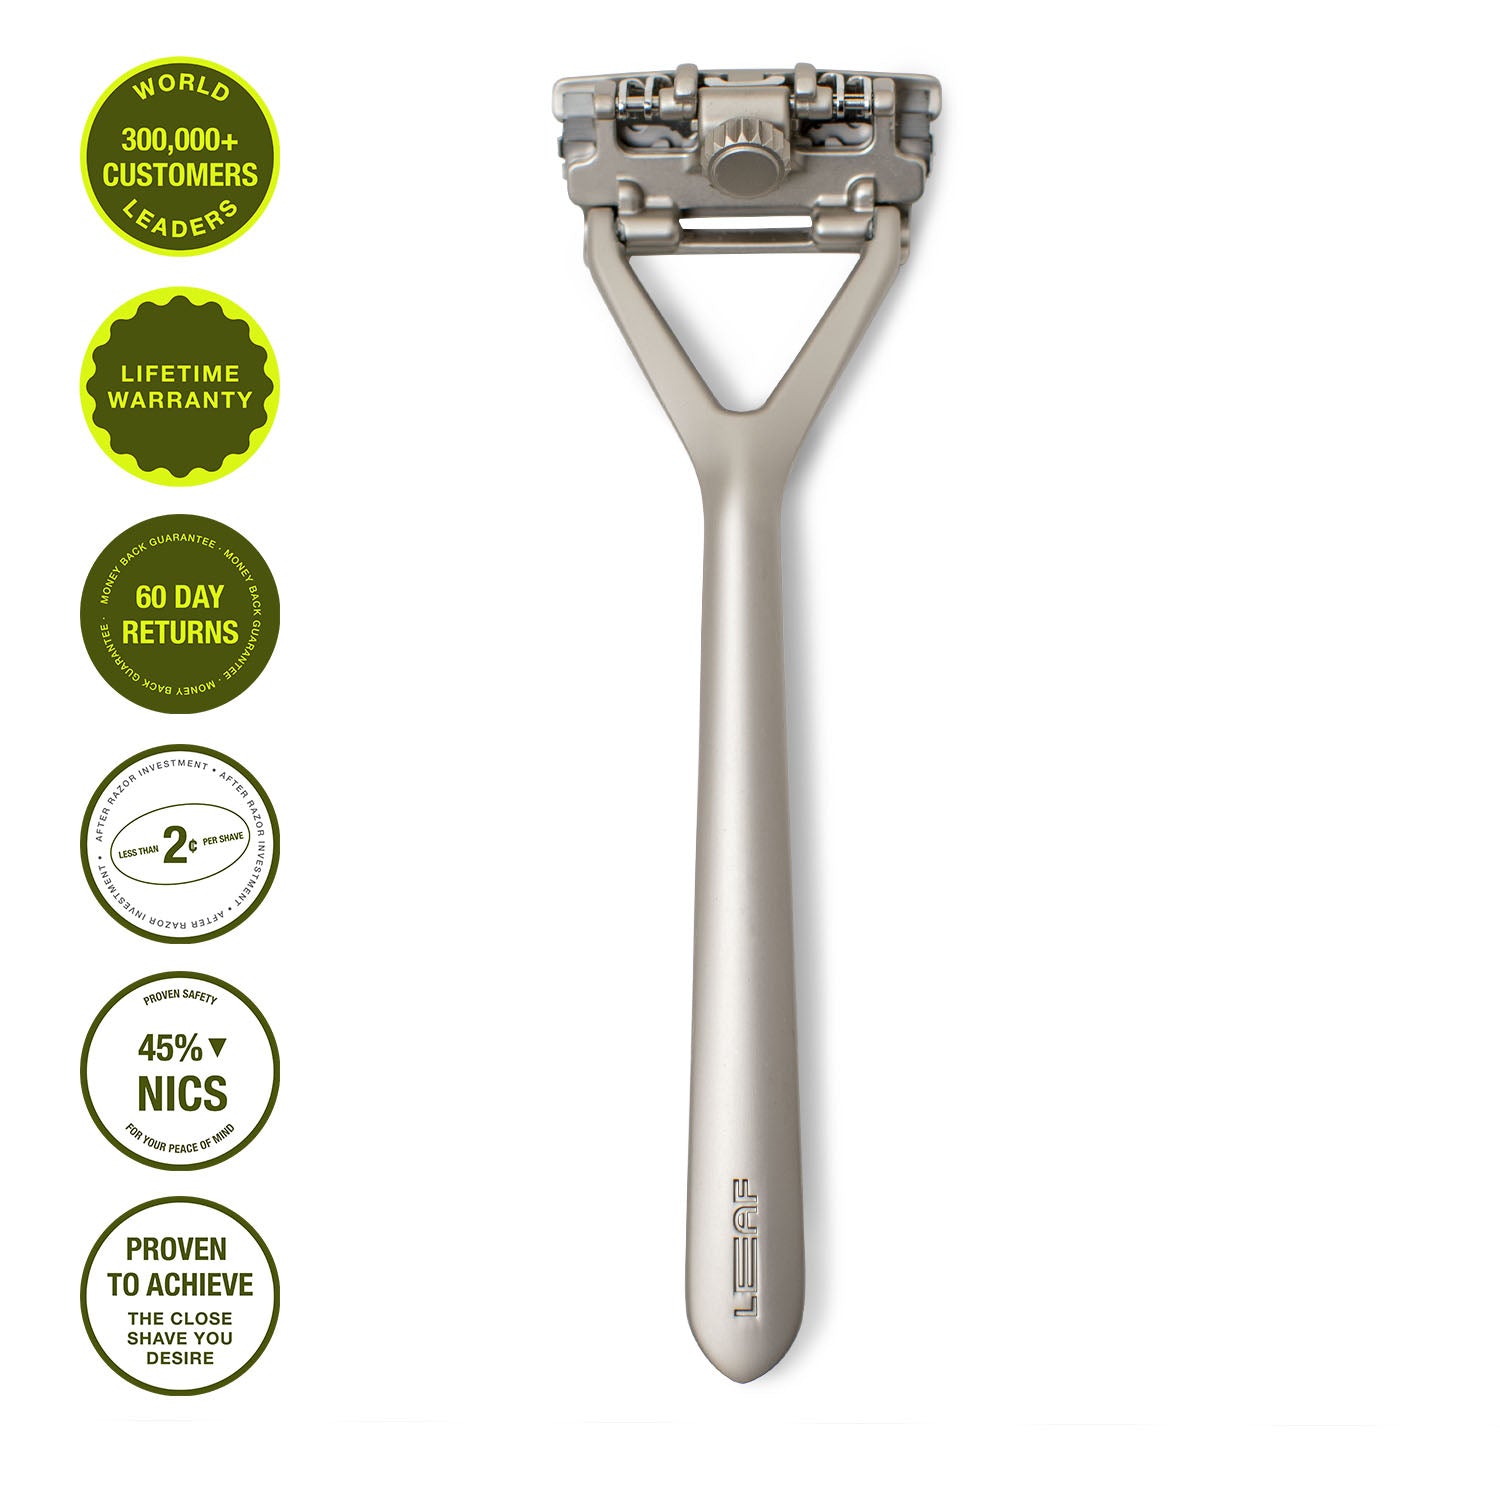 7 Best Women's Reusable Razor Brands For a Clean Shave & Cleaner Planet